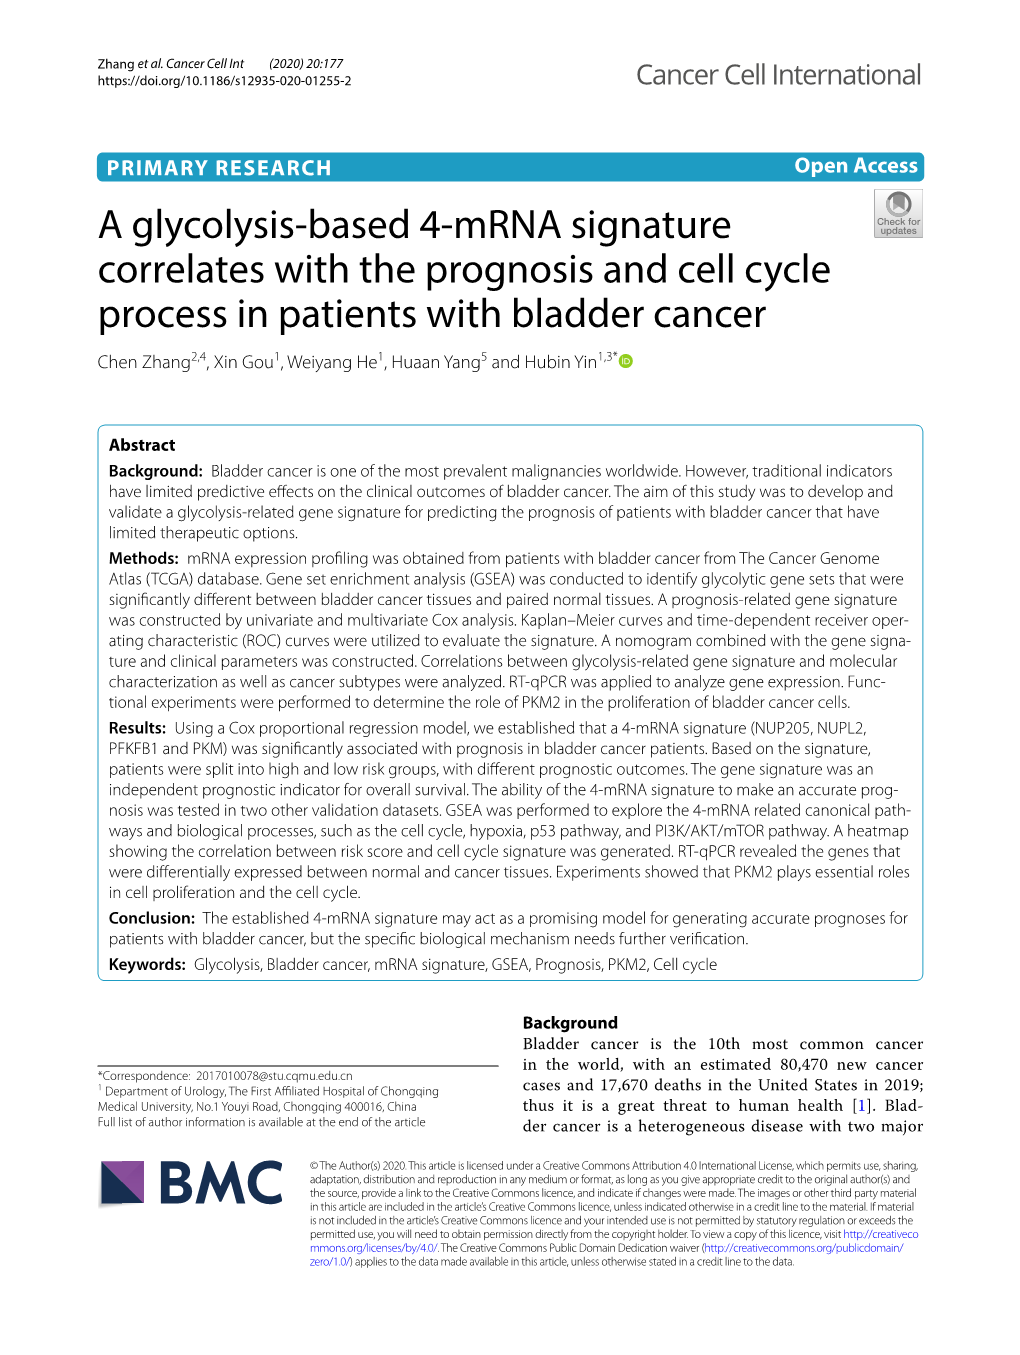 A Glycolysis-Based 4-Mrna Signature Correlates with the Prognosis And